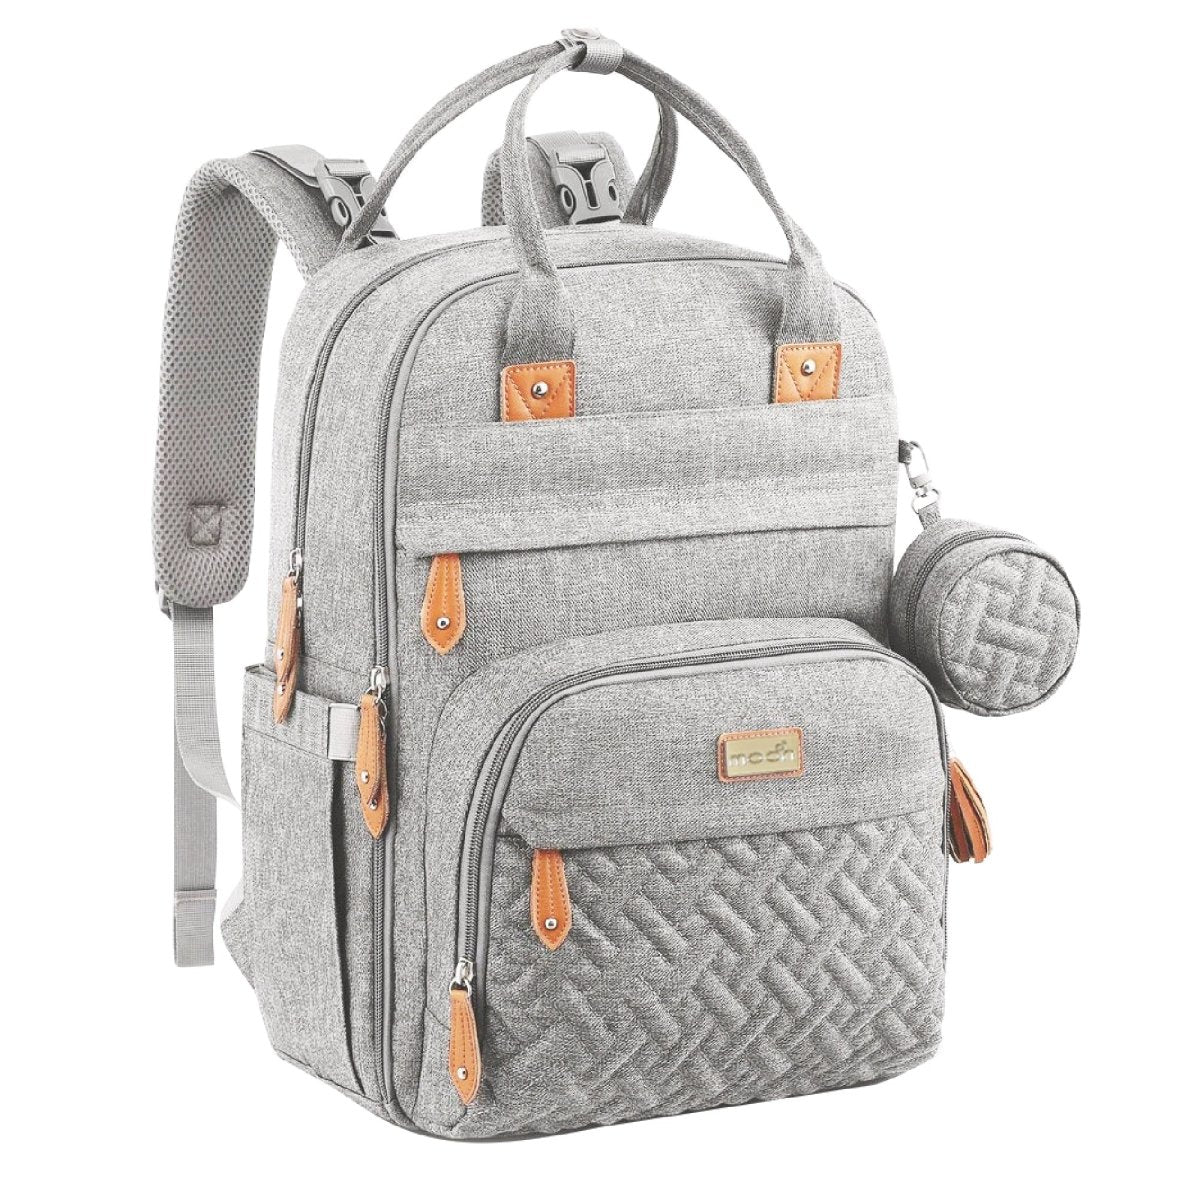 Moon KaryMe with pacifier case Diaper Bags Grey - MNADBGY01